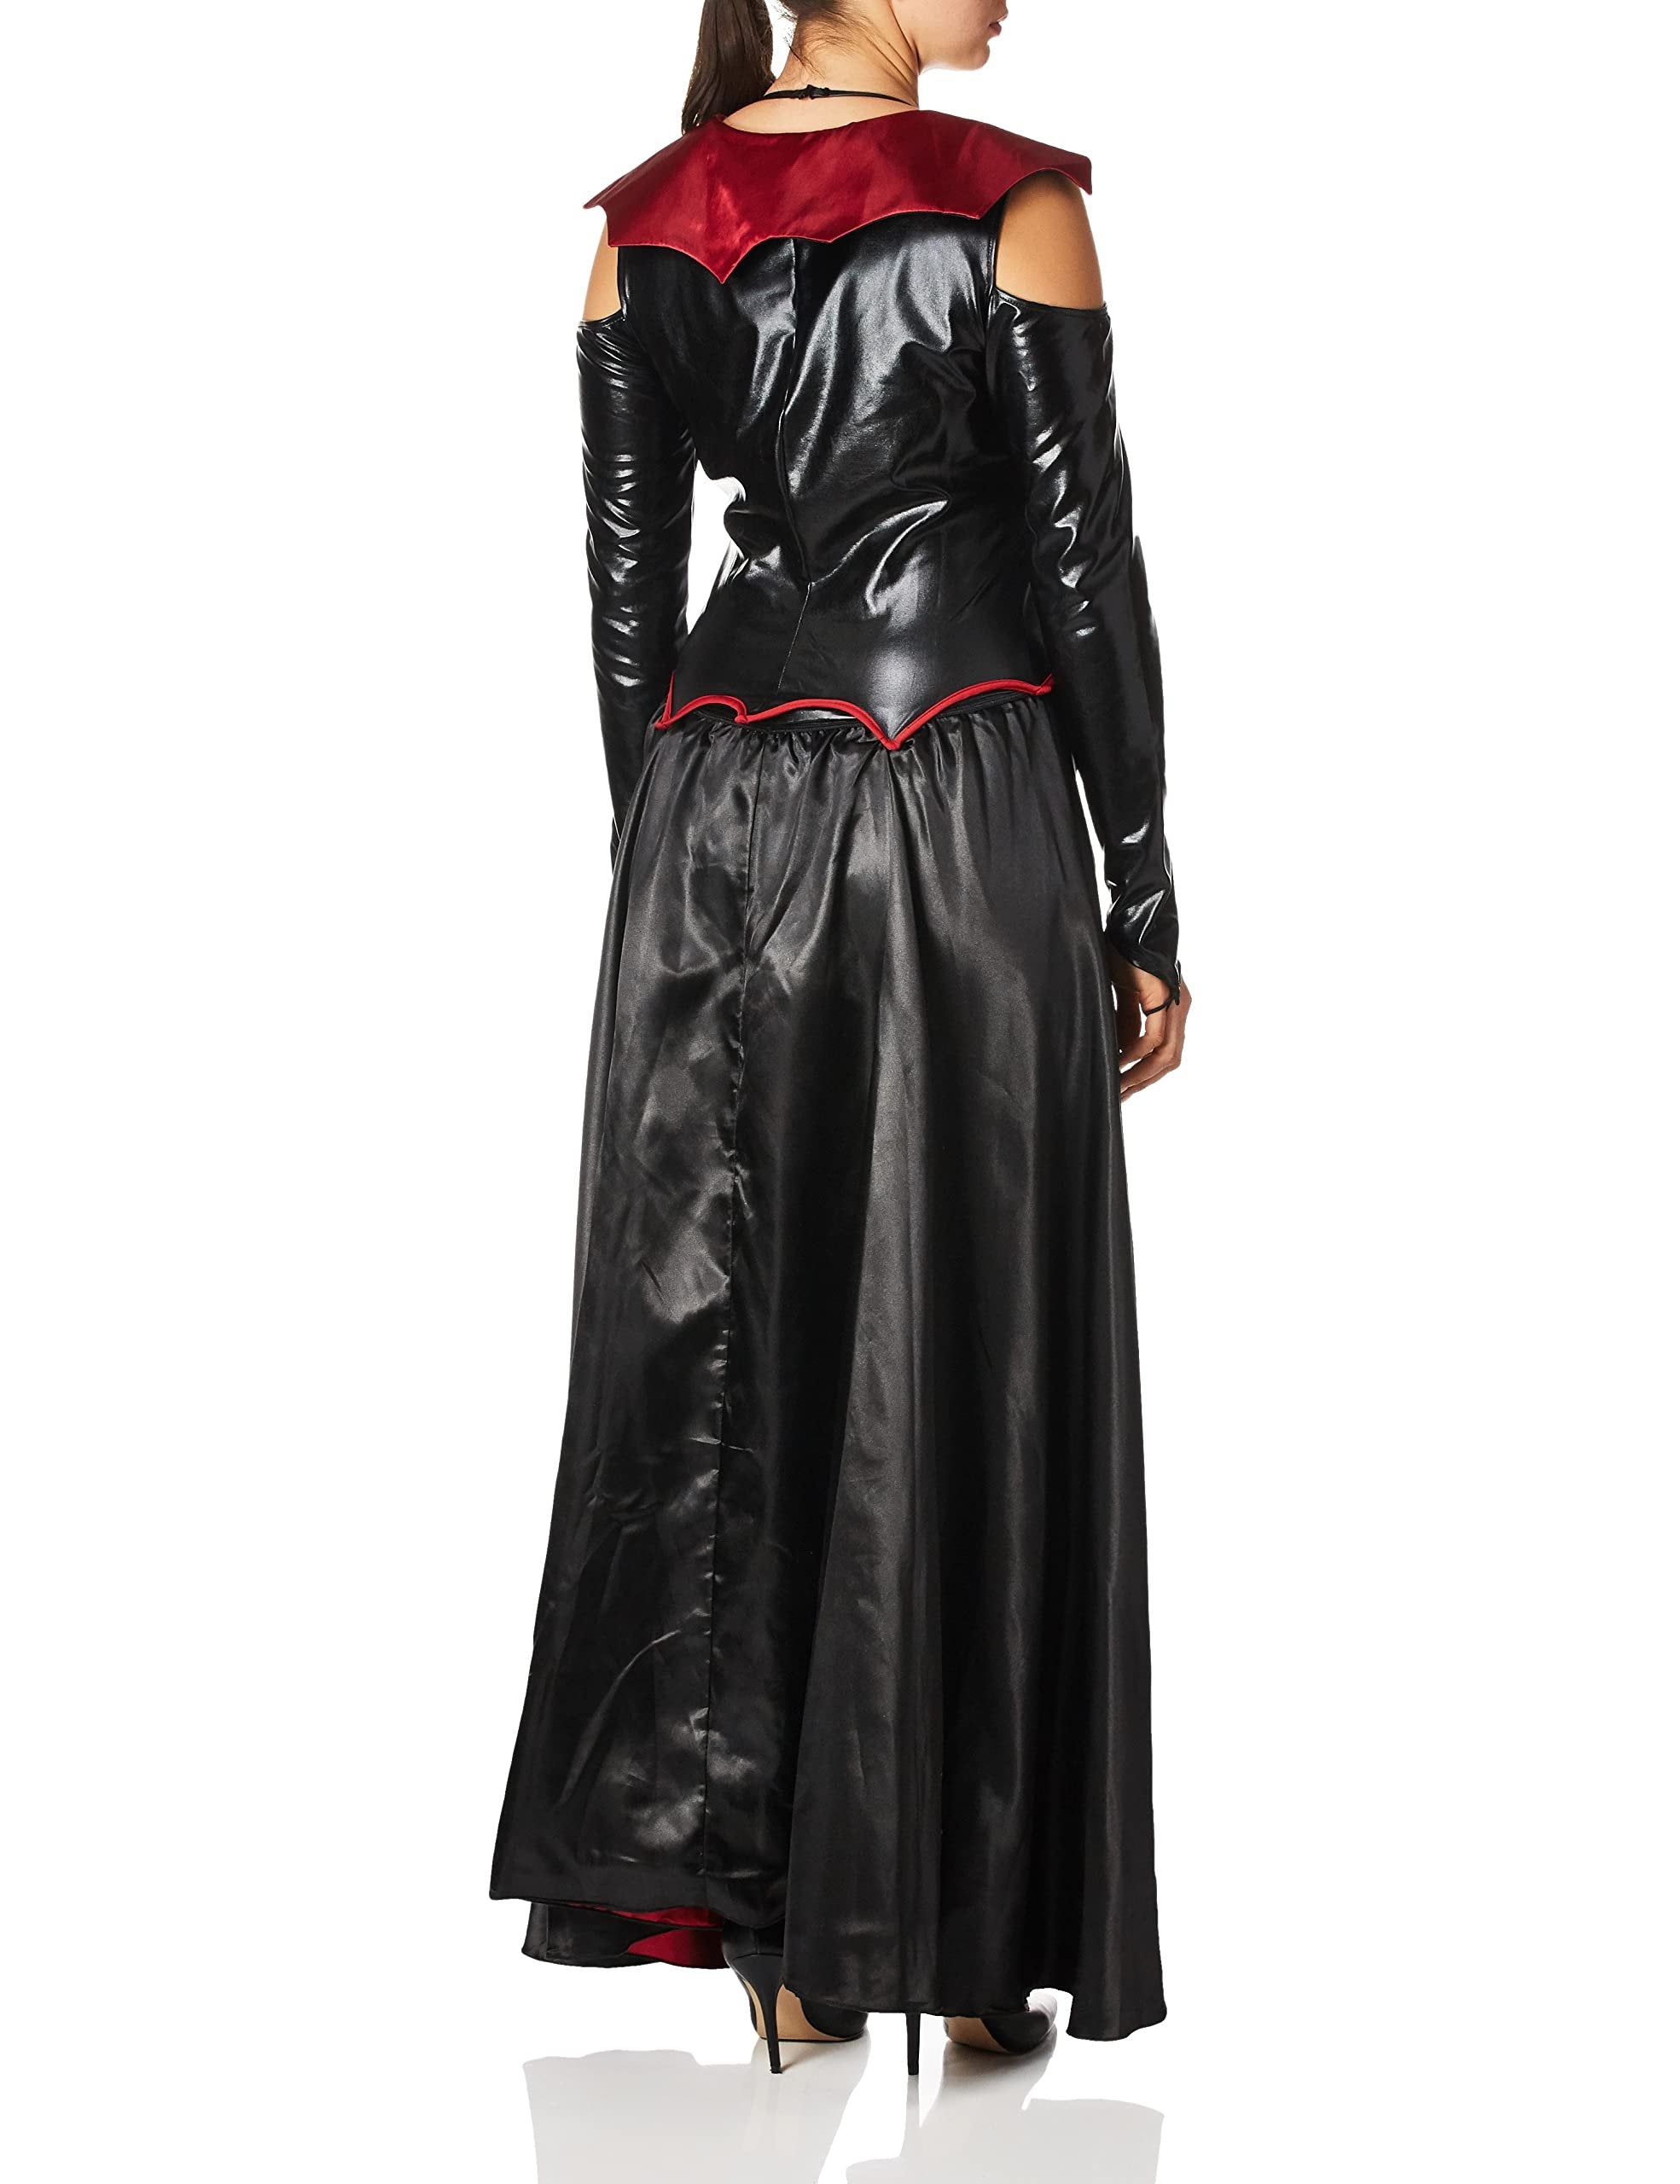 X-Large Dreamgirl Princess of Darkness Costume - Black/Red - Free Shipping & Returns